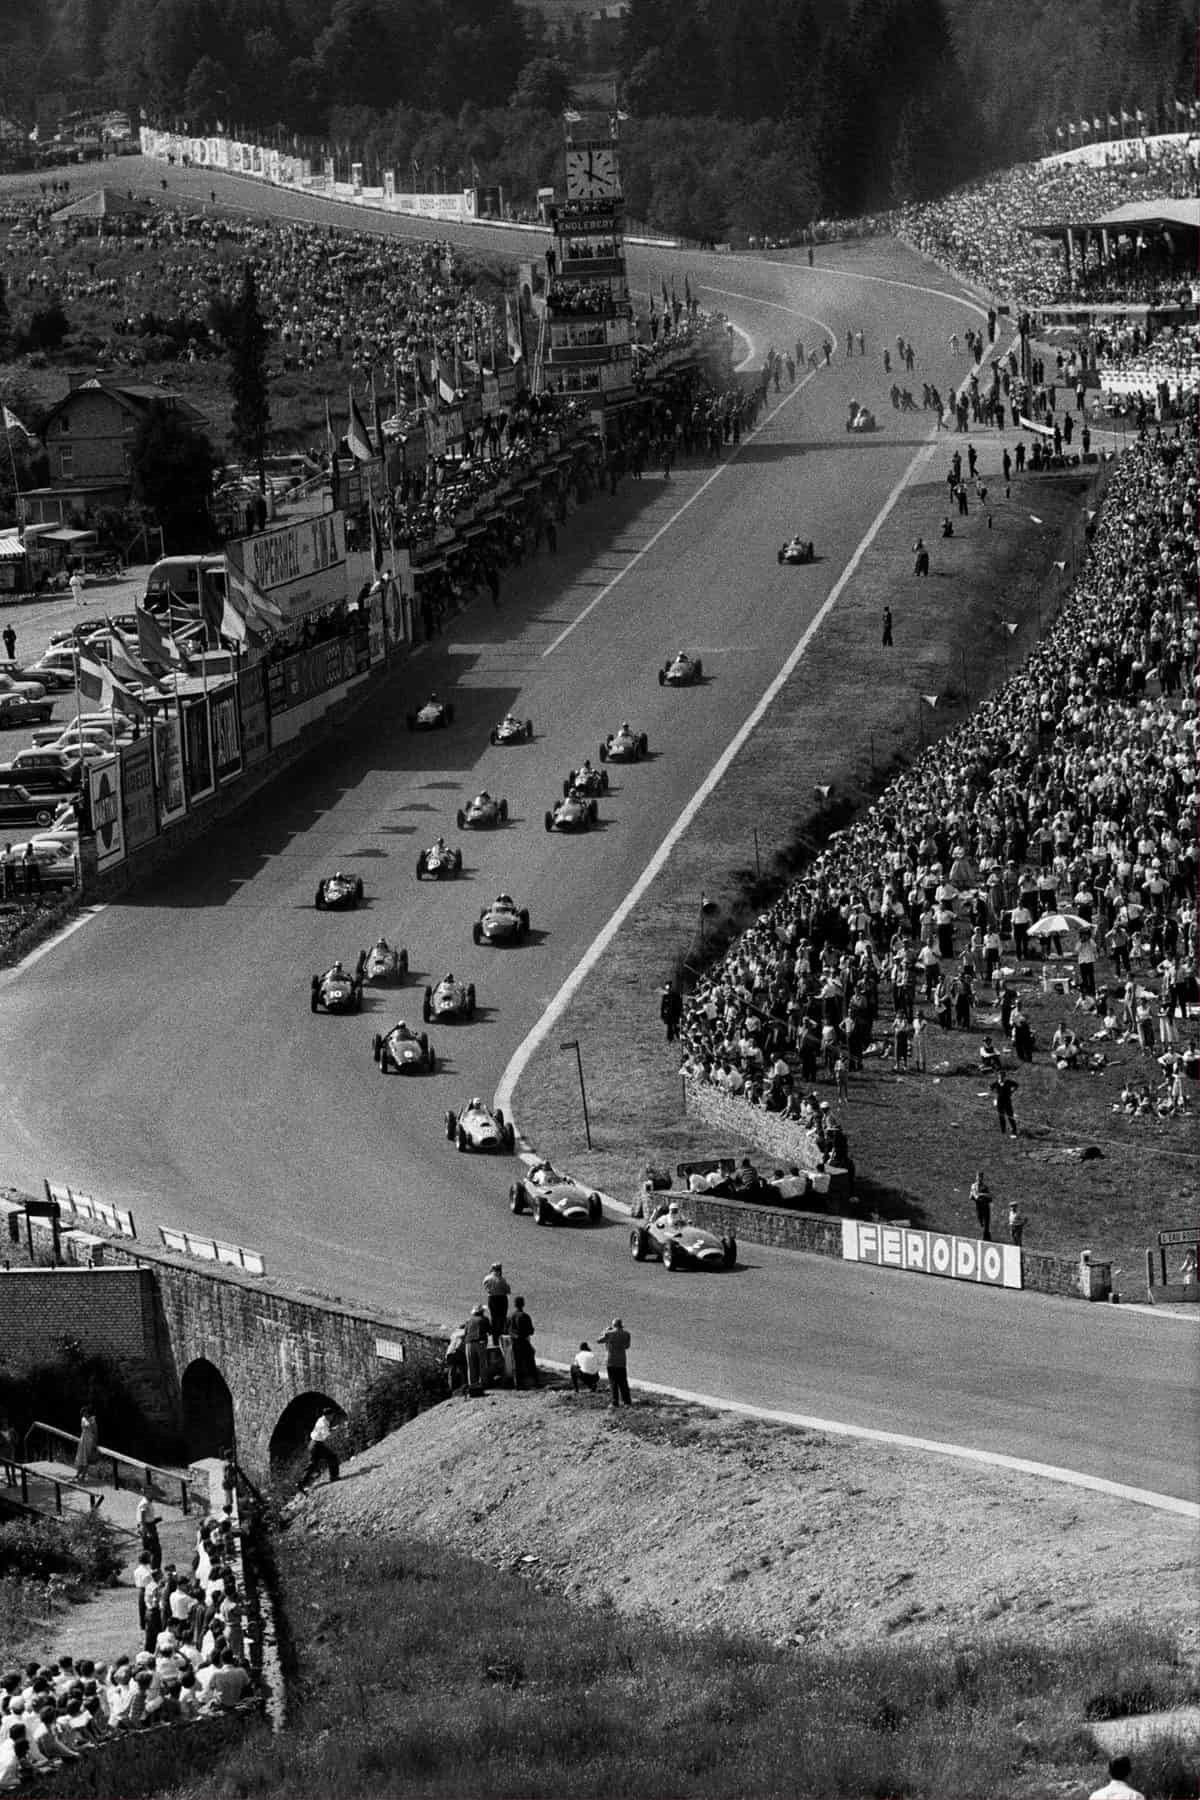 Charging up the hill at Spa-Francorchamps in 1958, en route to the challenging Radillon curve, Moss’ Vanwall leads Tony Brooks and a determined pack of snarling GP cars. 